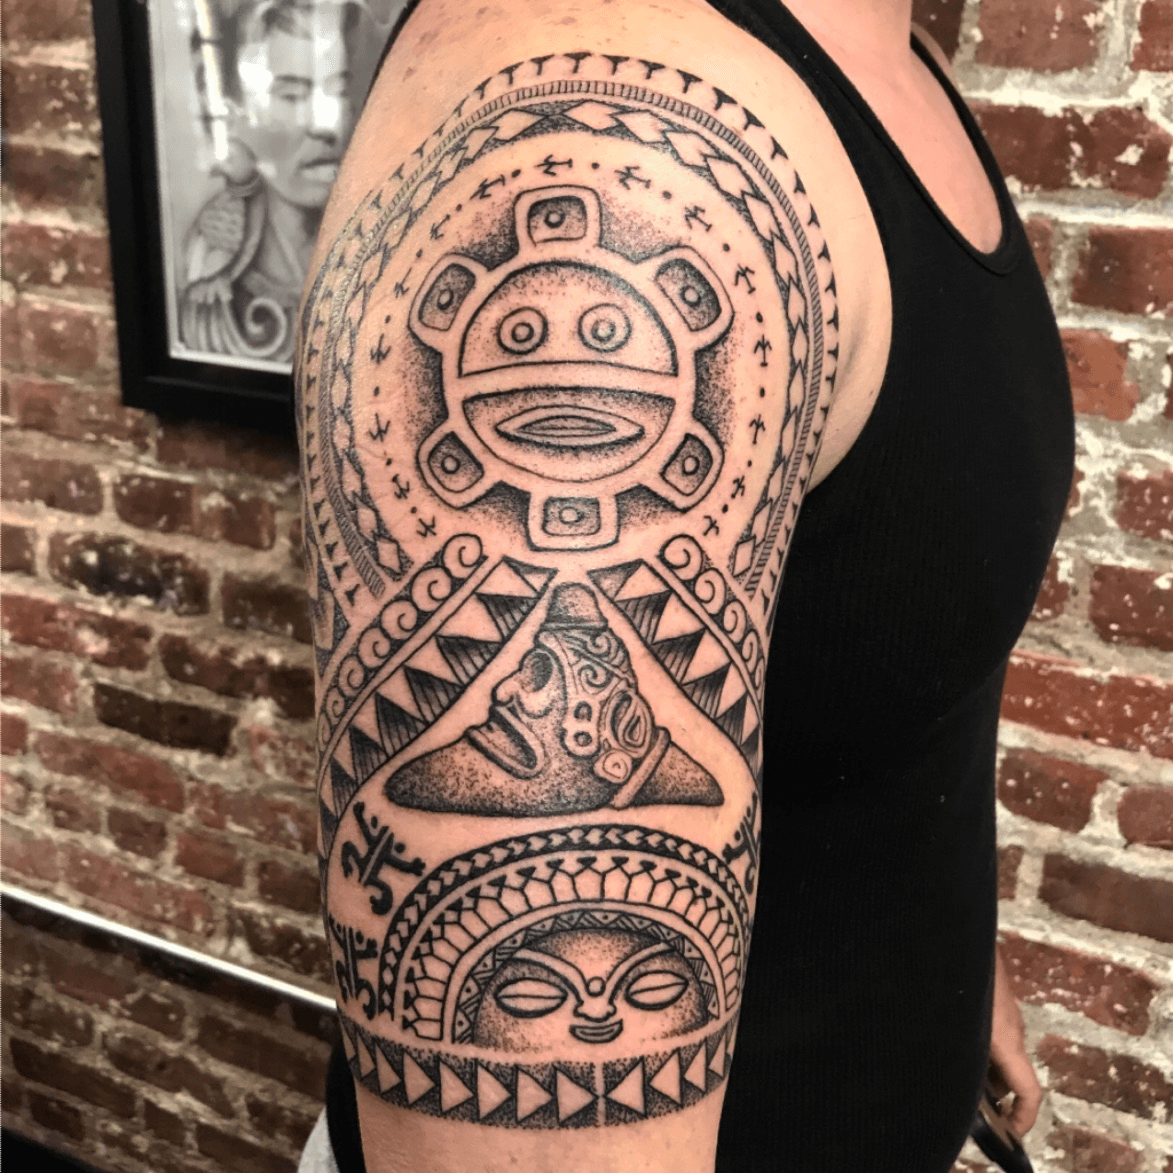 Taino Coqui Tattoo by Laura Murphy  Little Johns Tattoos and piercings in  Greensboro NC  rtattoos